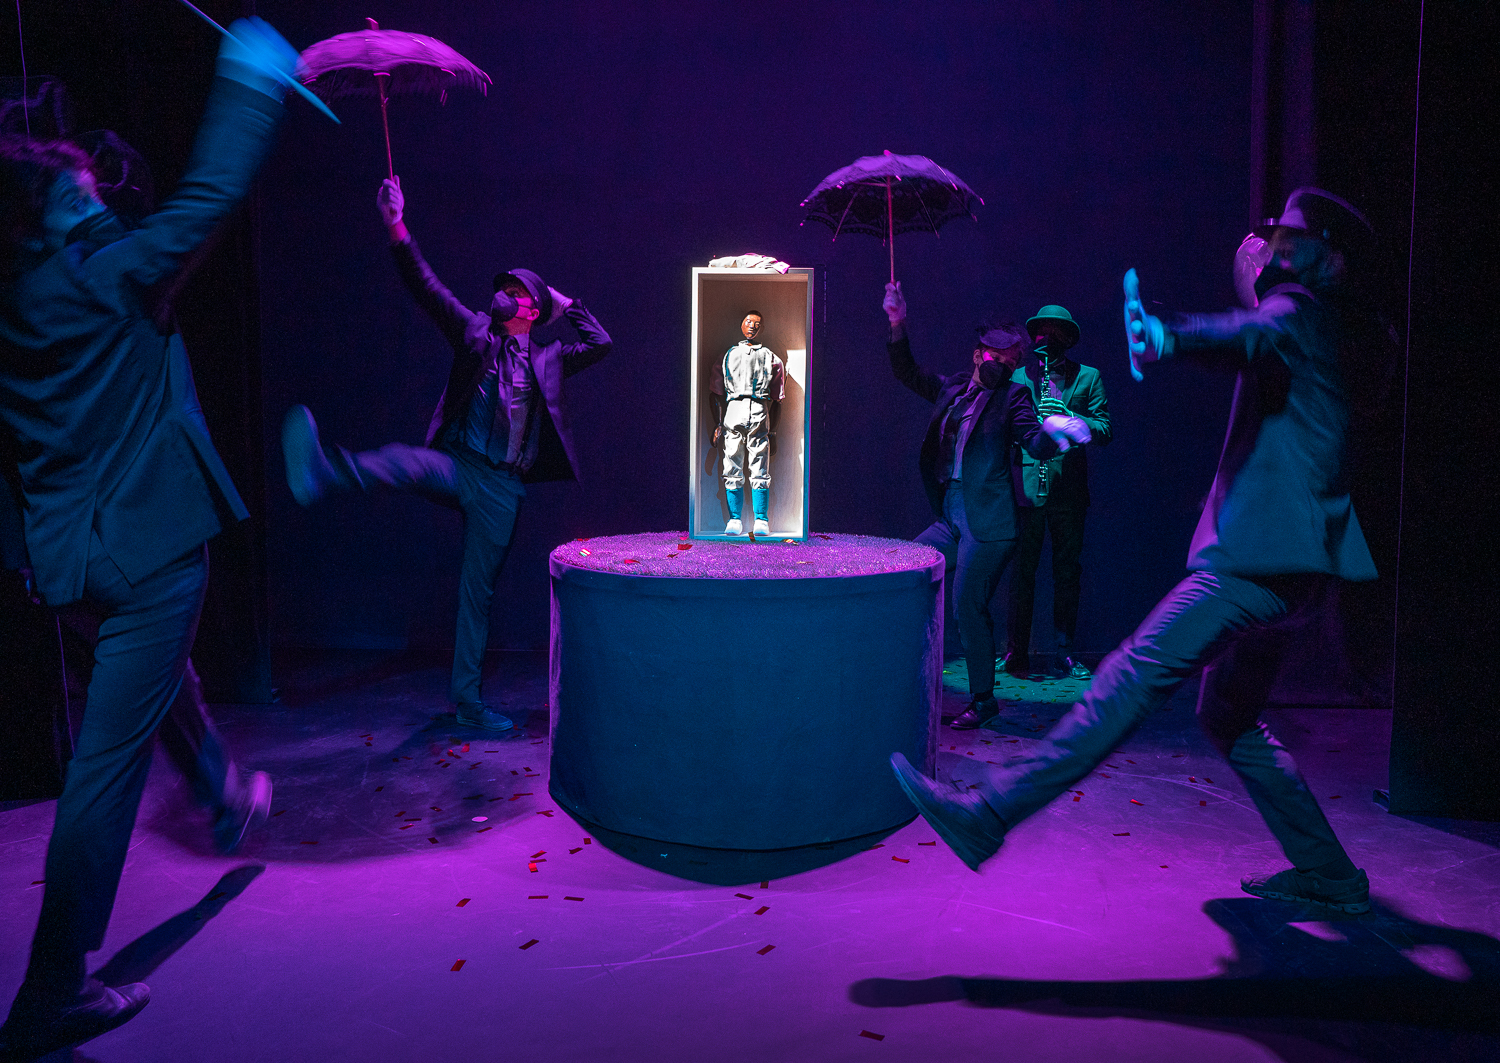 Image of the puppet in "Fly Away" surrounded by performers